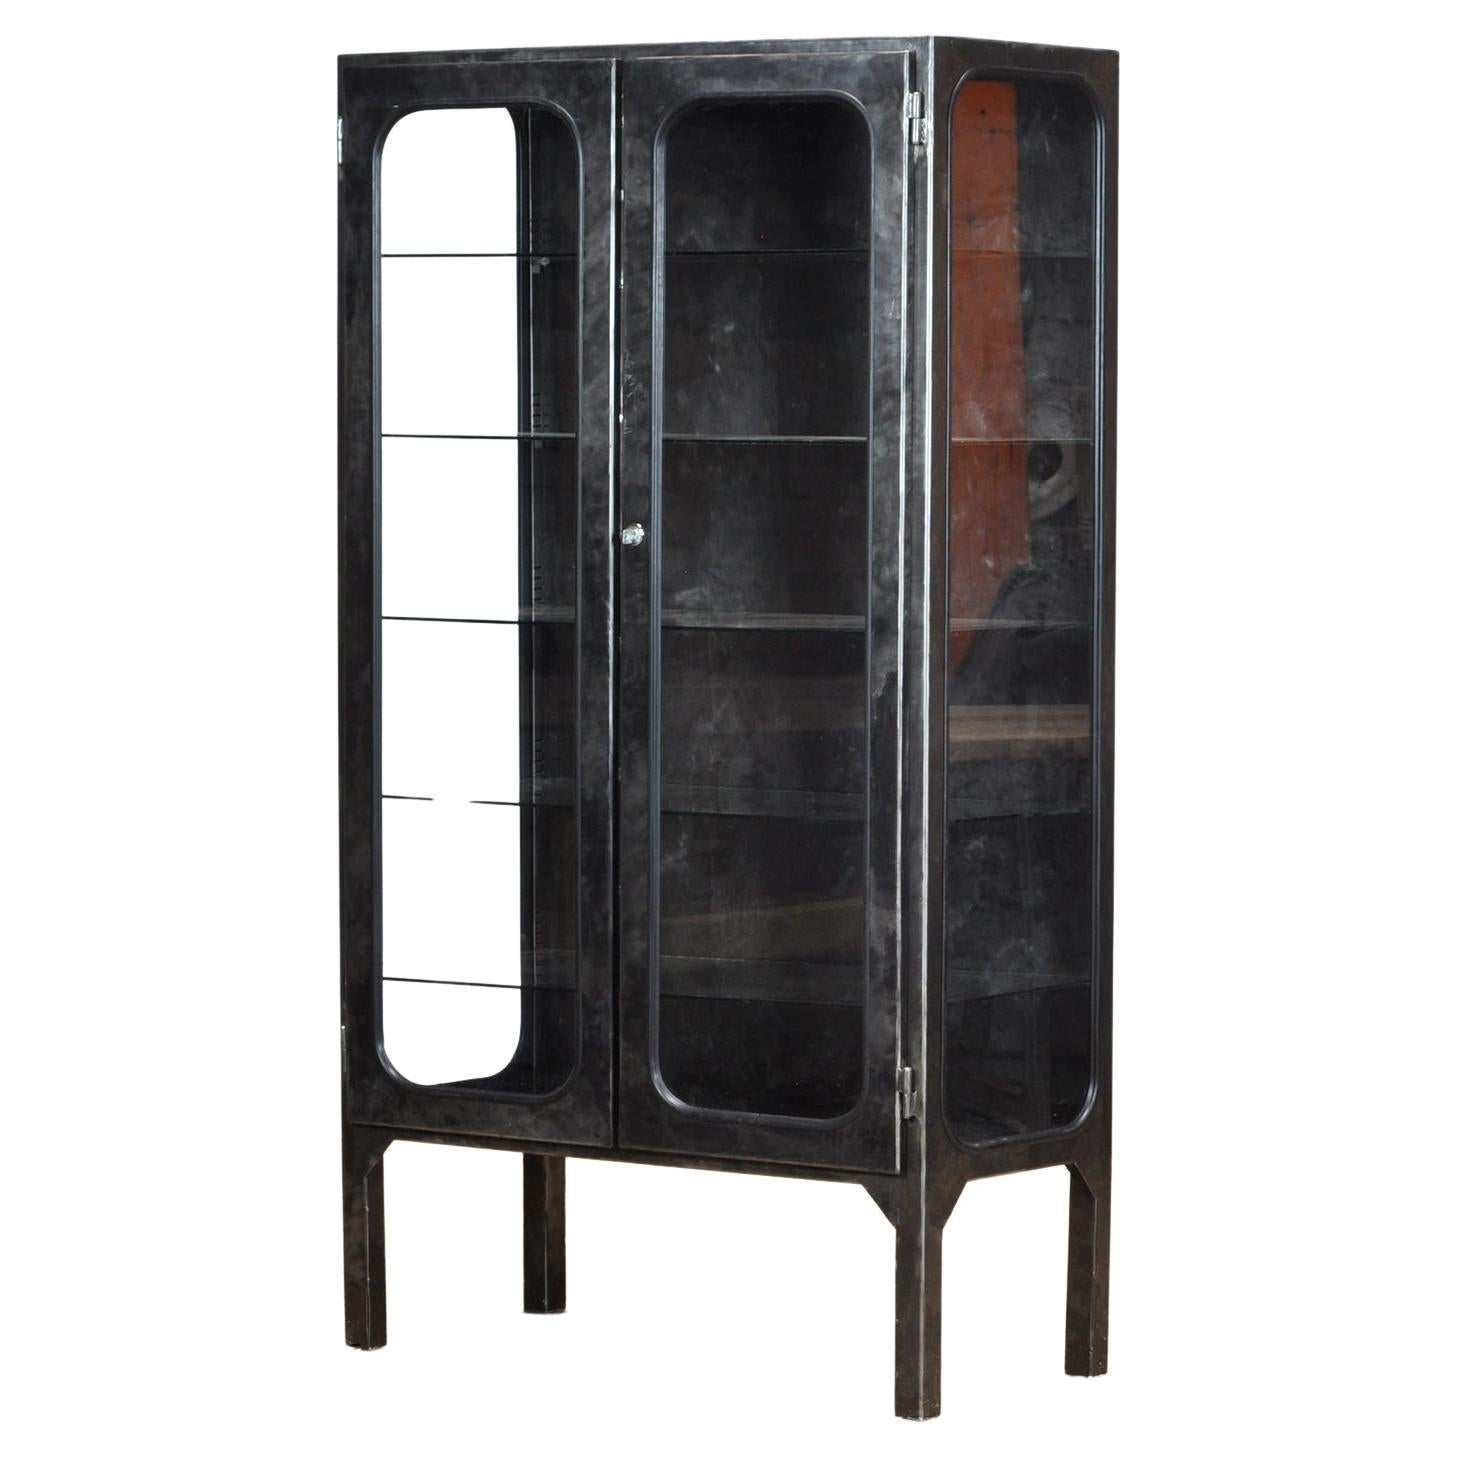 Vintage Glass & Iron Medical Cabinet, 1970s